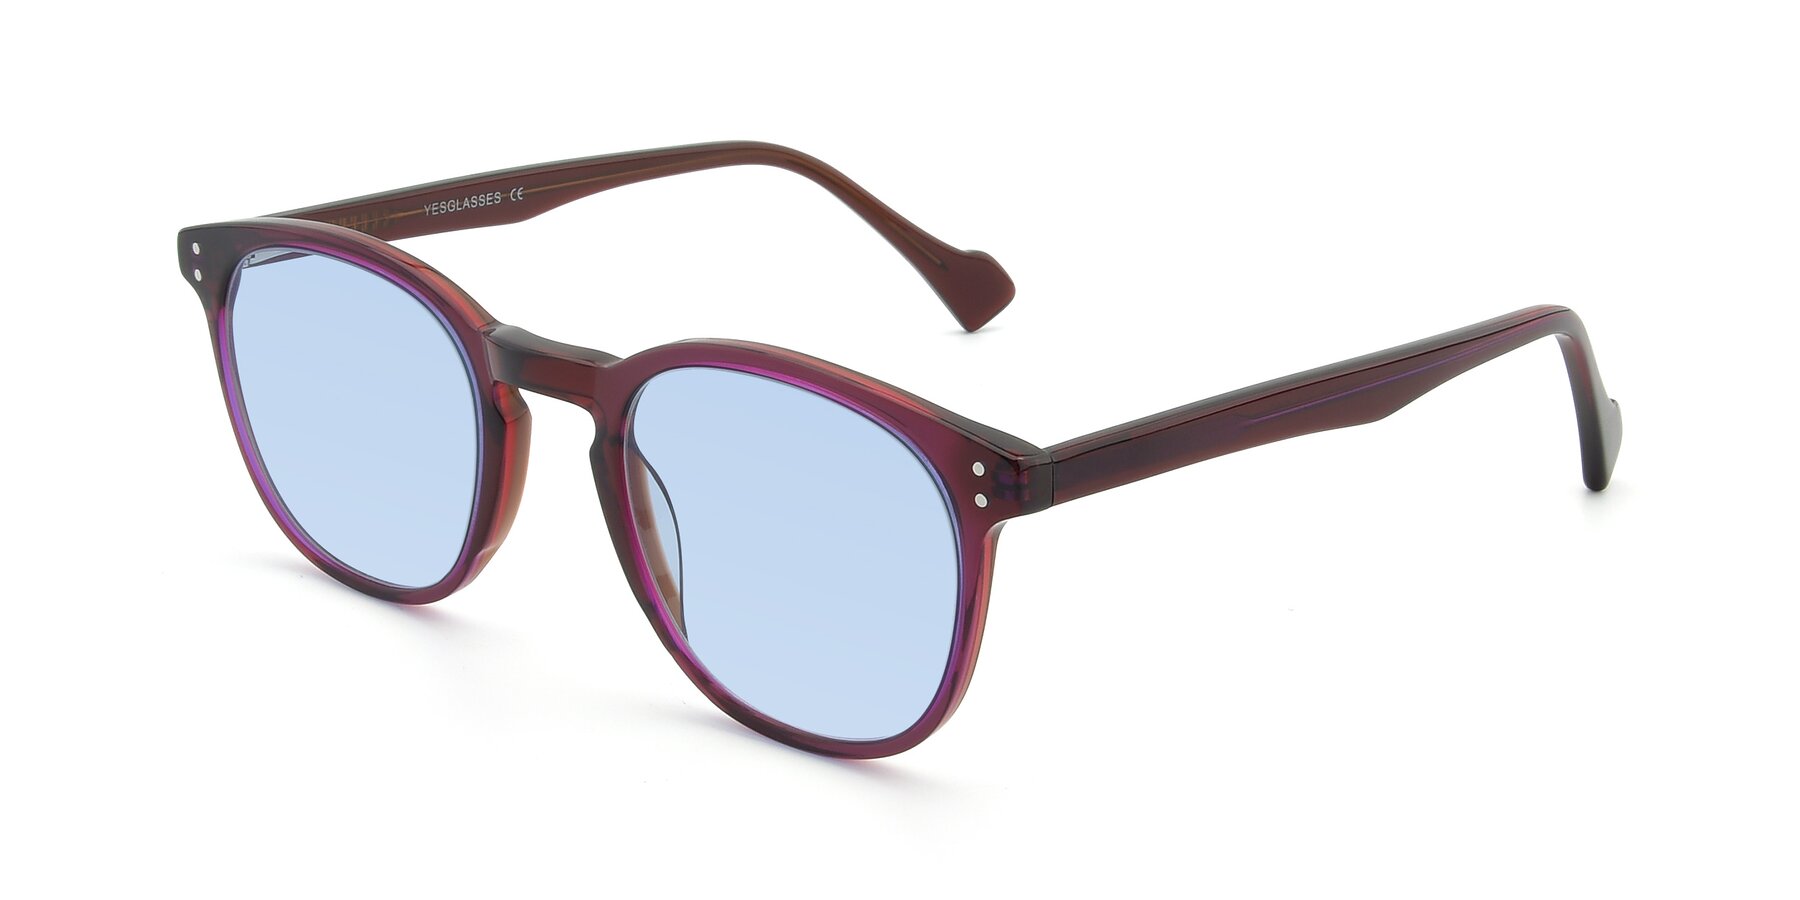 Angle of 17293 in Violet with Light Blue Tinted Lenses